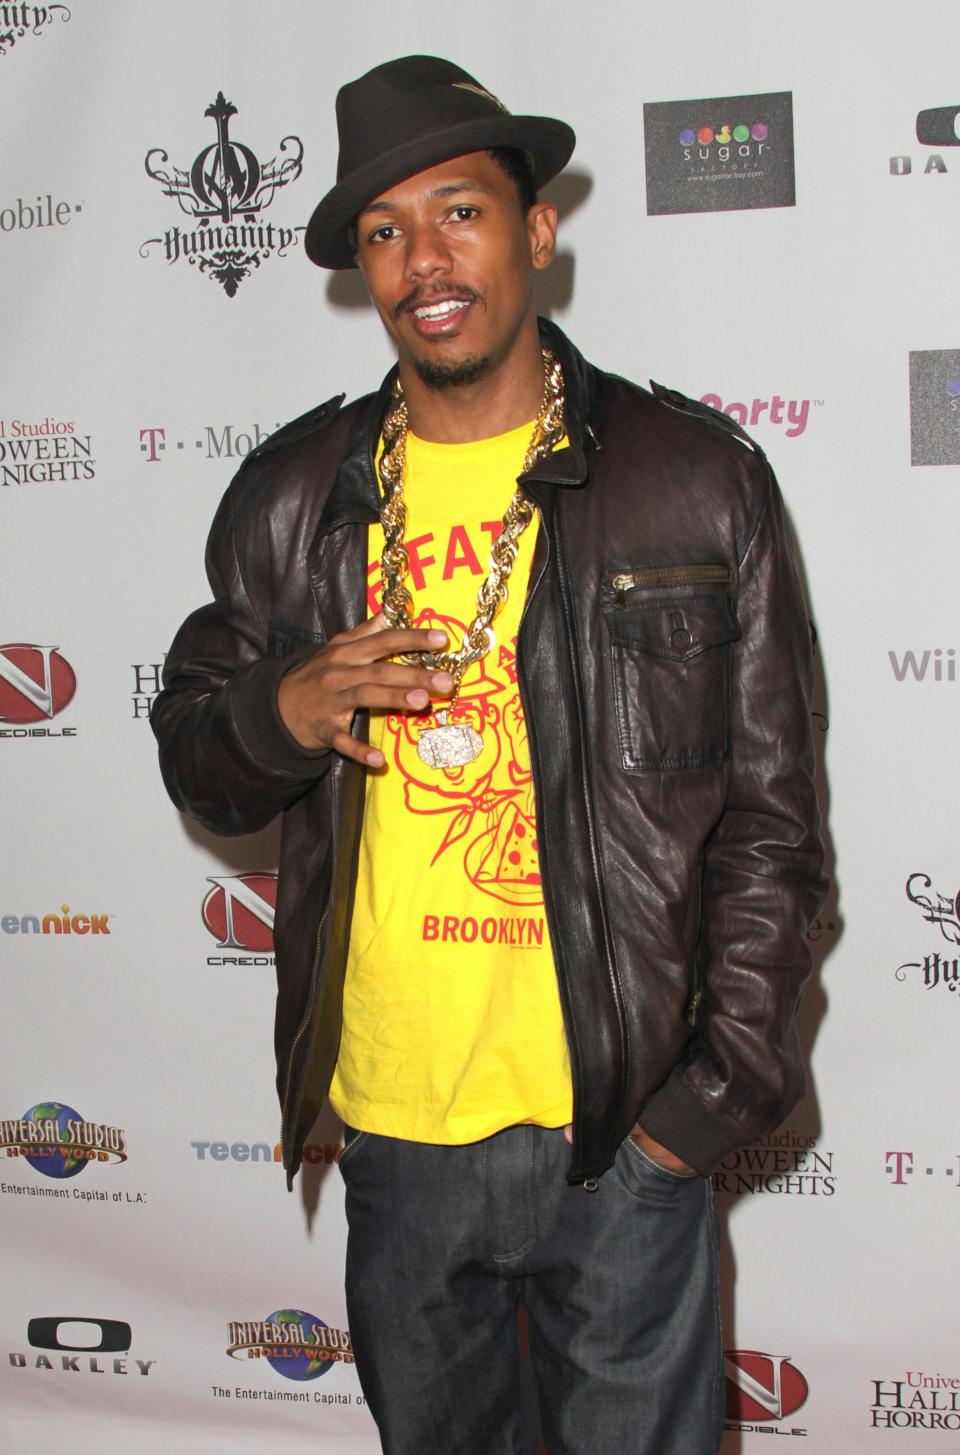 Nick Cannon's 30th Birthday Bash At Universal Studios Hollywood - Arrivals